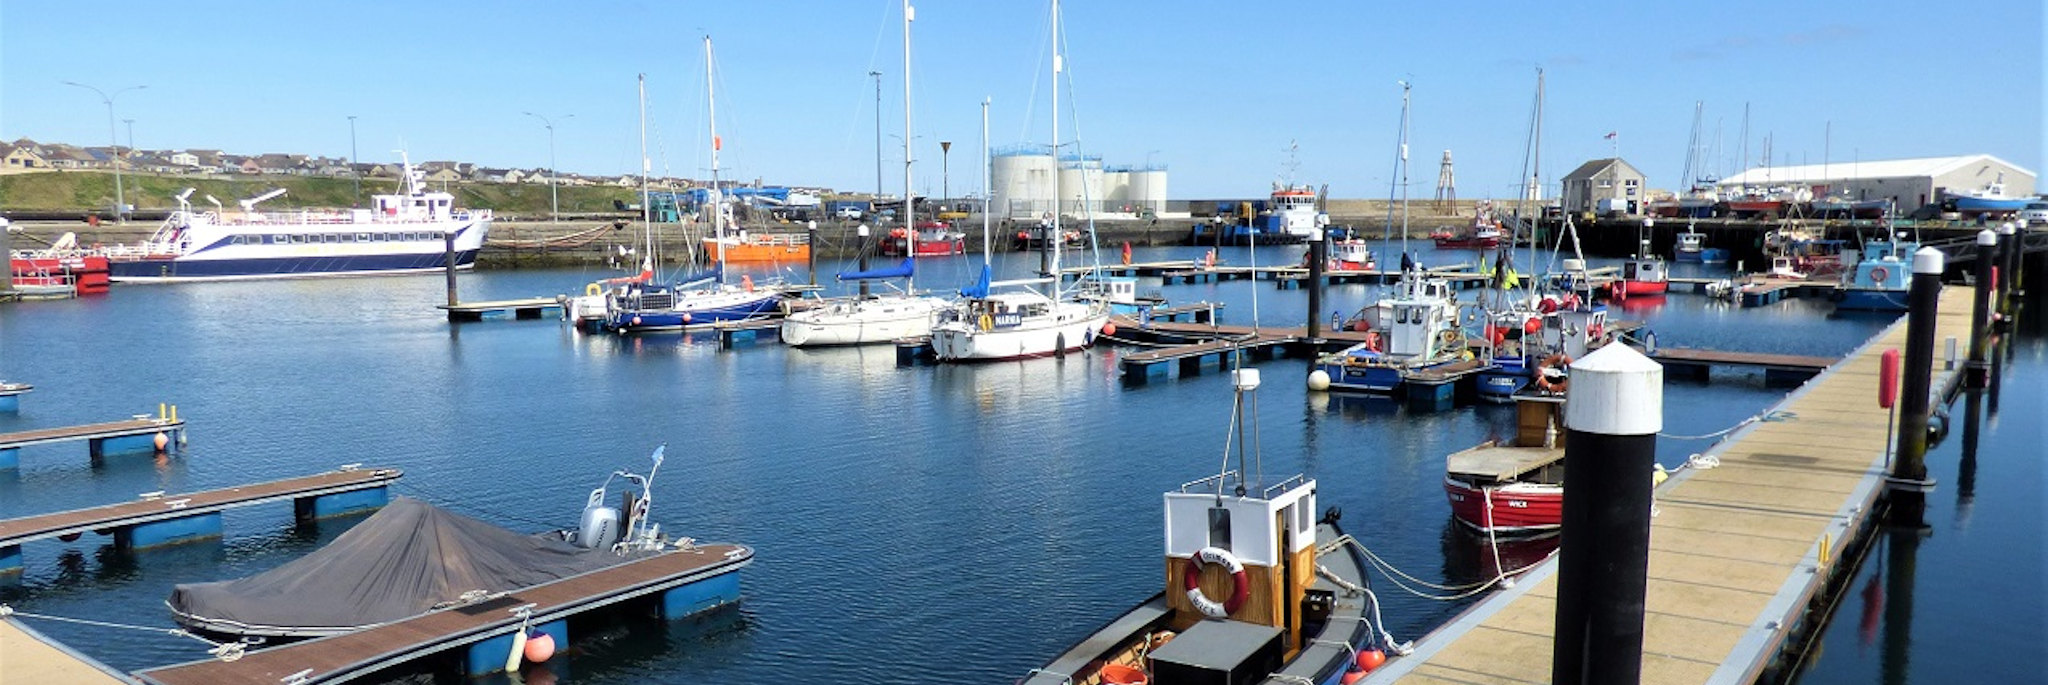 Wick harbour in Caithness